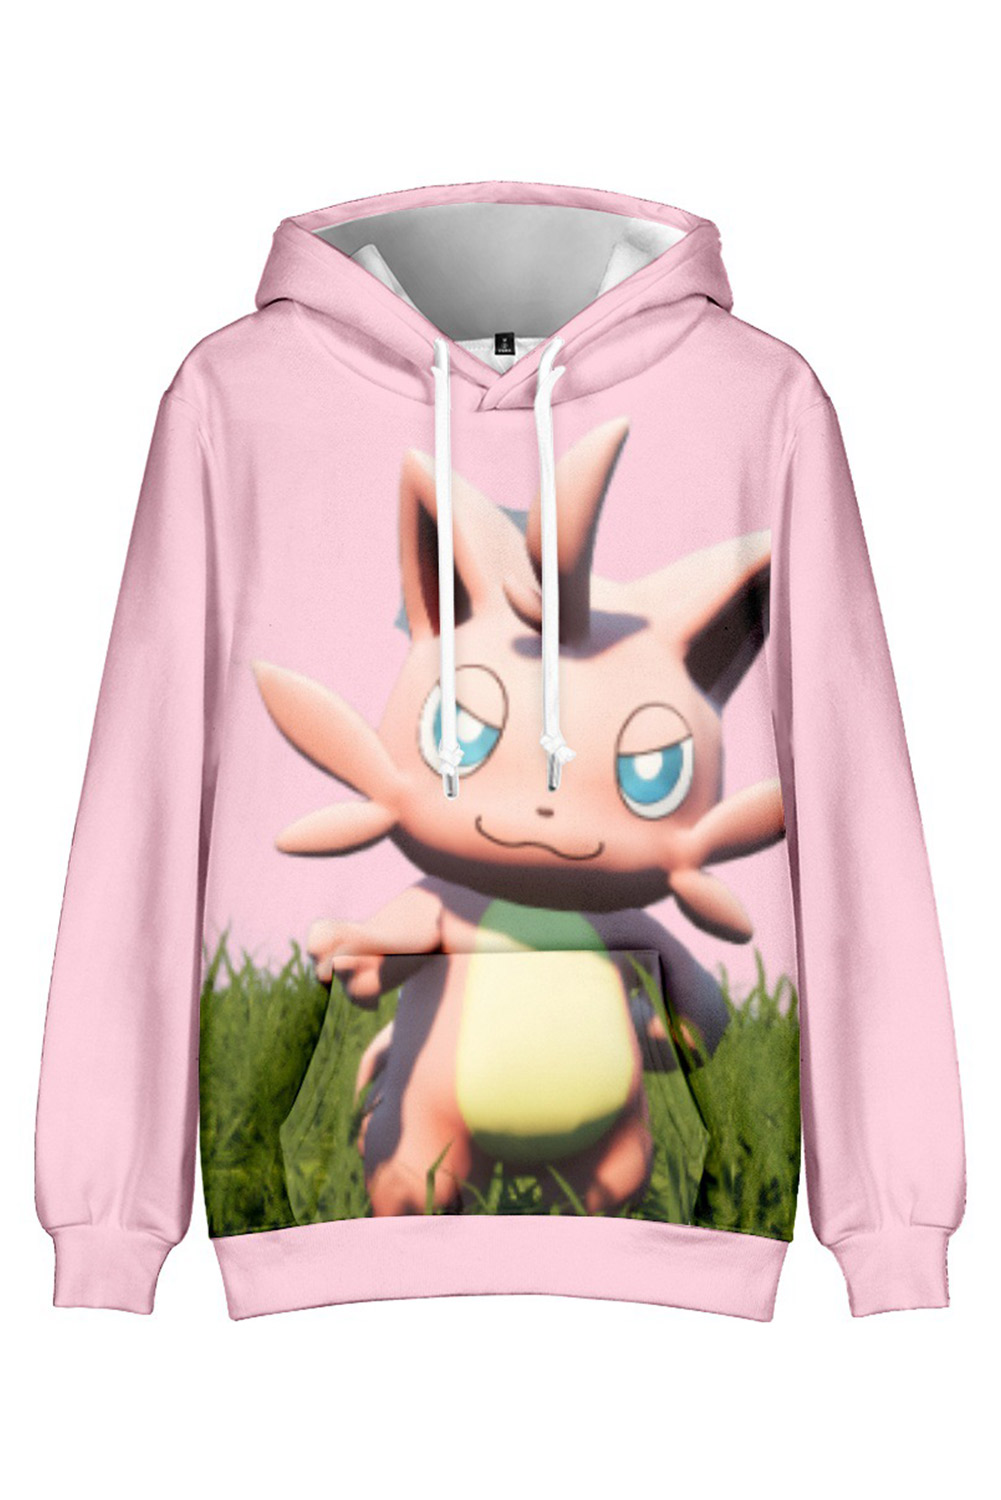 Game Palworld Cattiva Adult Pink Cosplay Printed Pullover Hoodie Outfits Halloween Carnival Suit Cosplay Costume